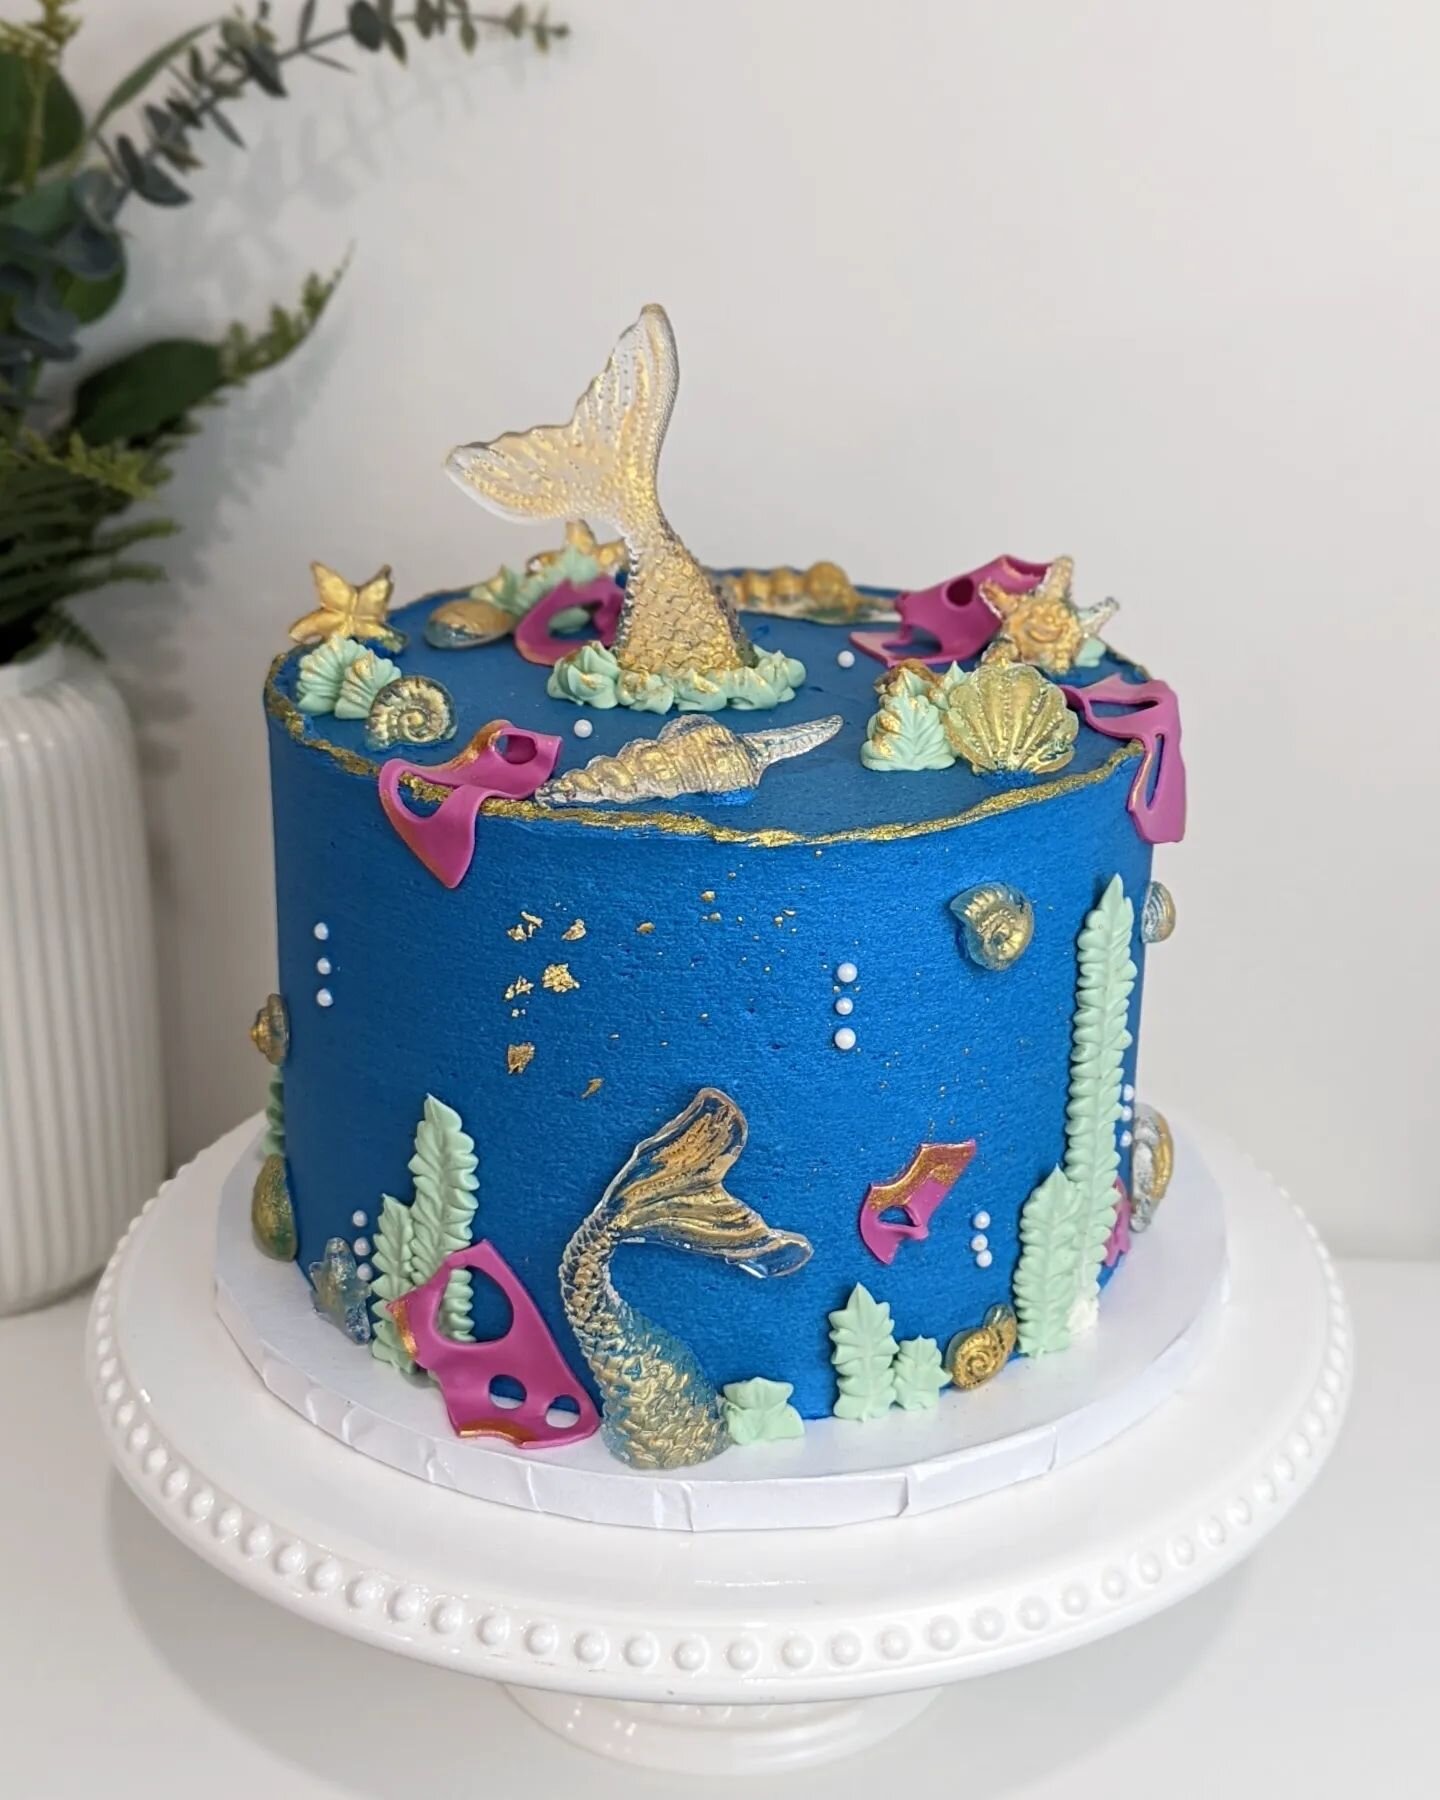 Marine life is like a dream land. So many colours and creatures under the sea, it's such a mesmerizing world. Trying to recreate a little snippet of underwater life, on a cake, is always really fun! I get to use so many colour combinations and the re